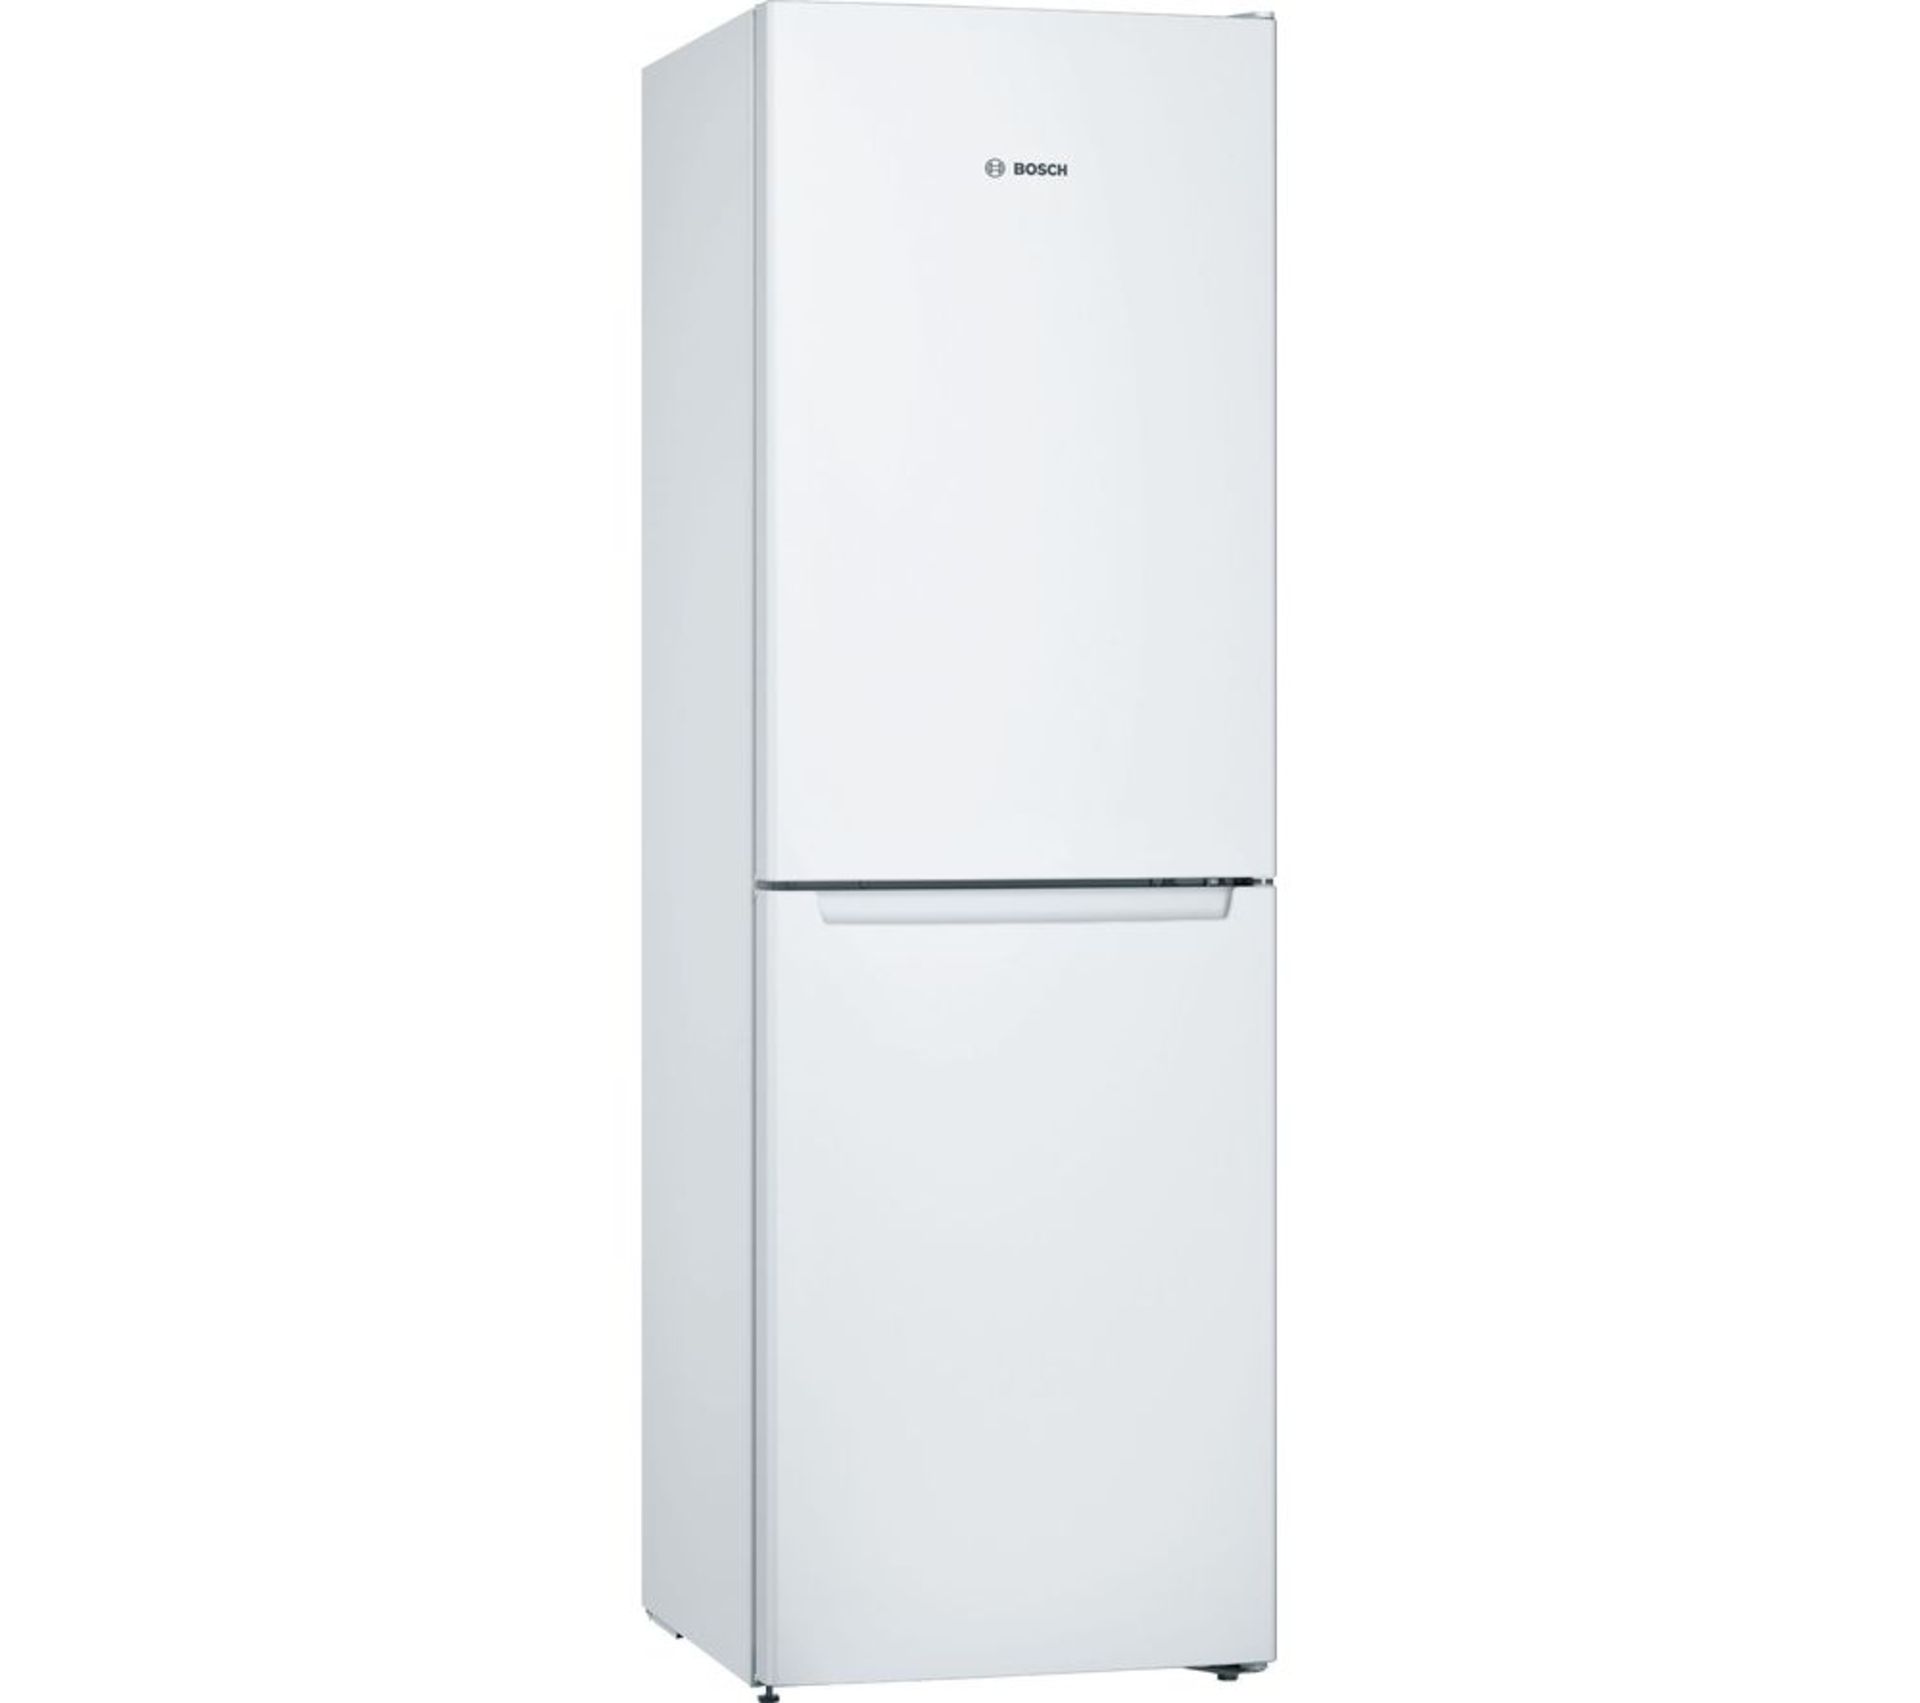 Pallet of 4 Mixed BOSCH 60cm Fridge freezers. Latest selling price £1966.96* - Image 4 of 9